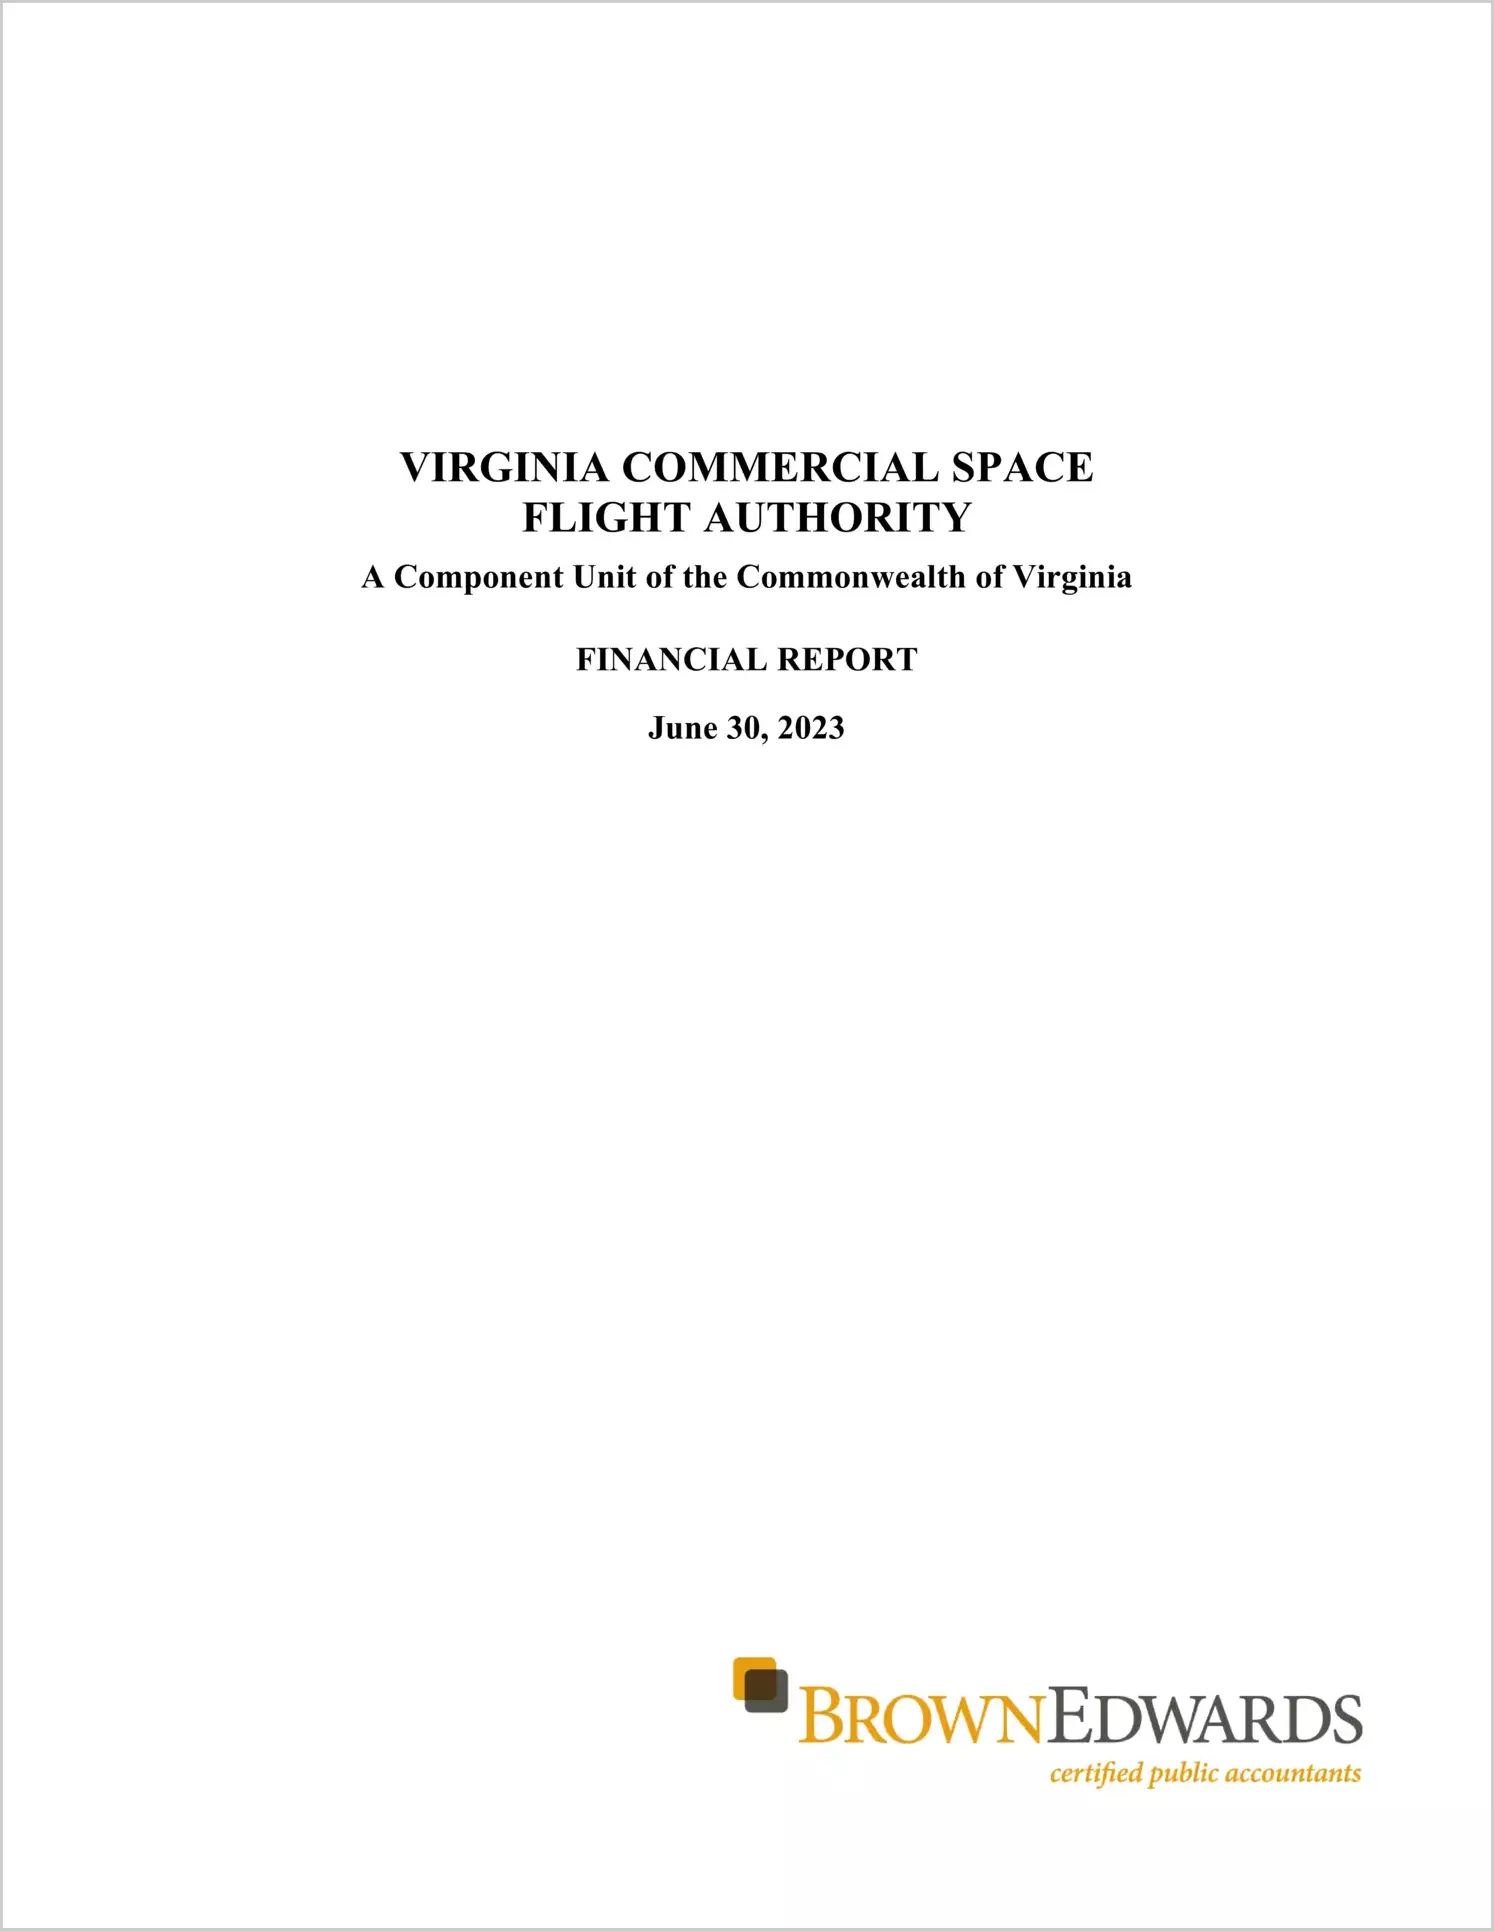 Virginia Commercial Space Flight Authority Financial Statements for the year ended June 30, 2023